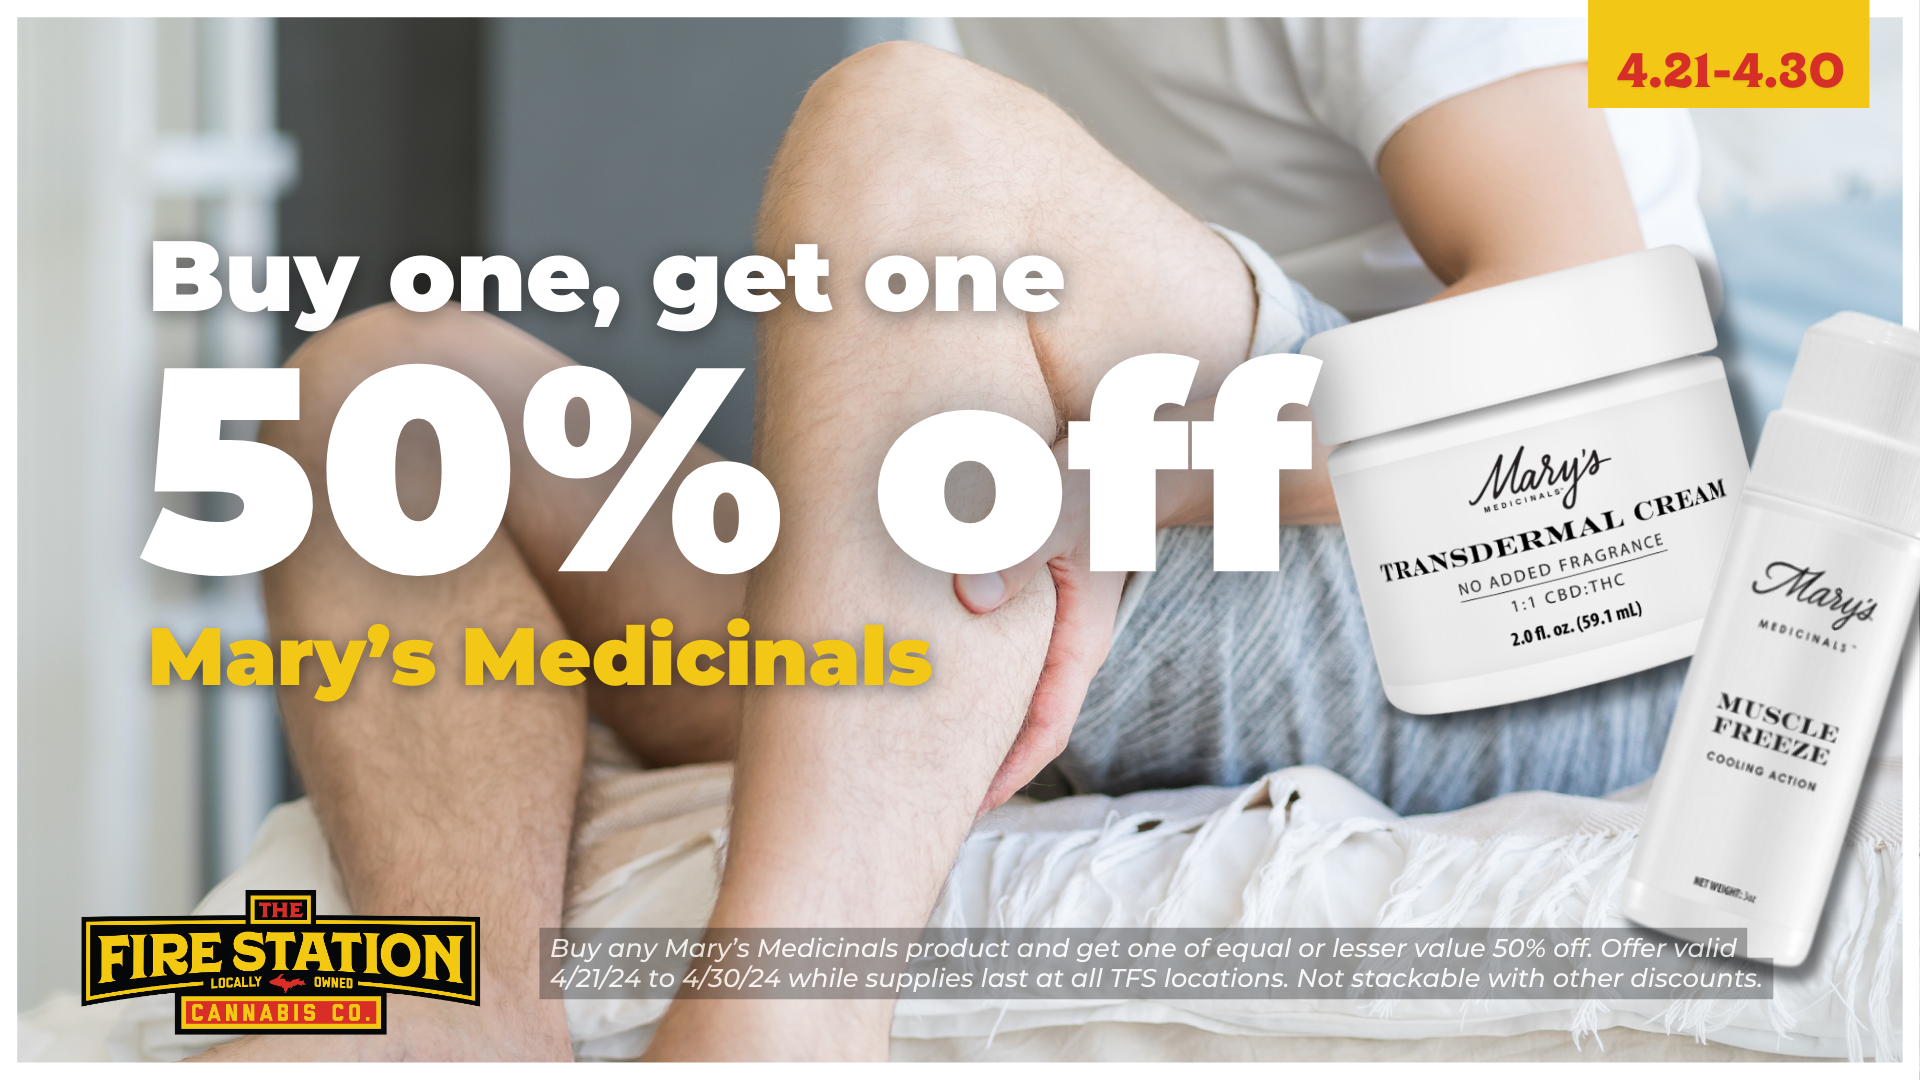 Buy any Mary’s Medicinals product and get one of equal or lesser value 50% off. Offer valid 4/21/24 to 4/30/24 while supplies last at all TFS locations. Not stackable with other discounts.